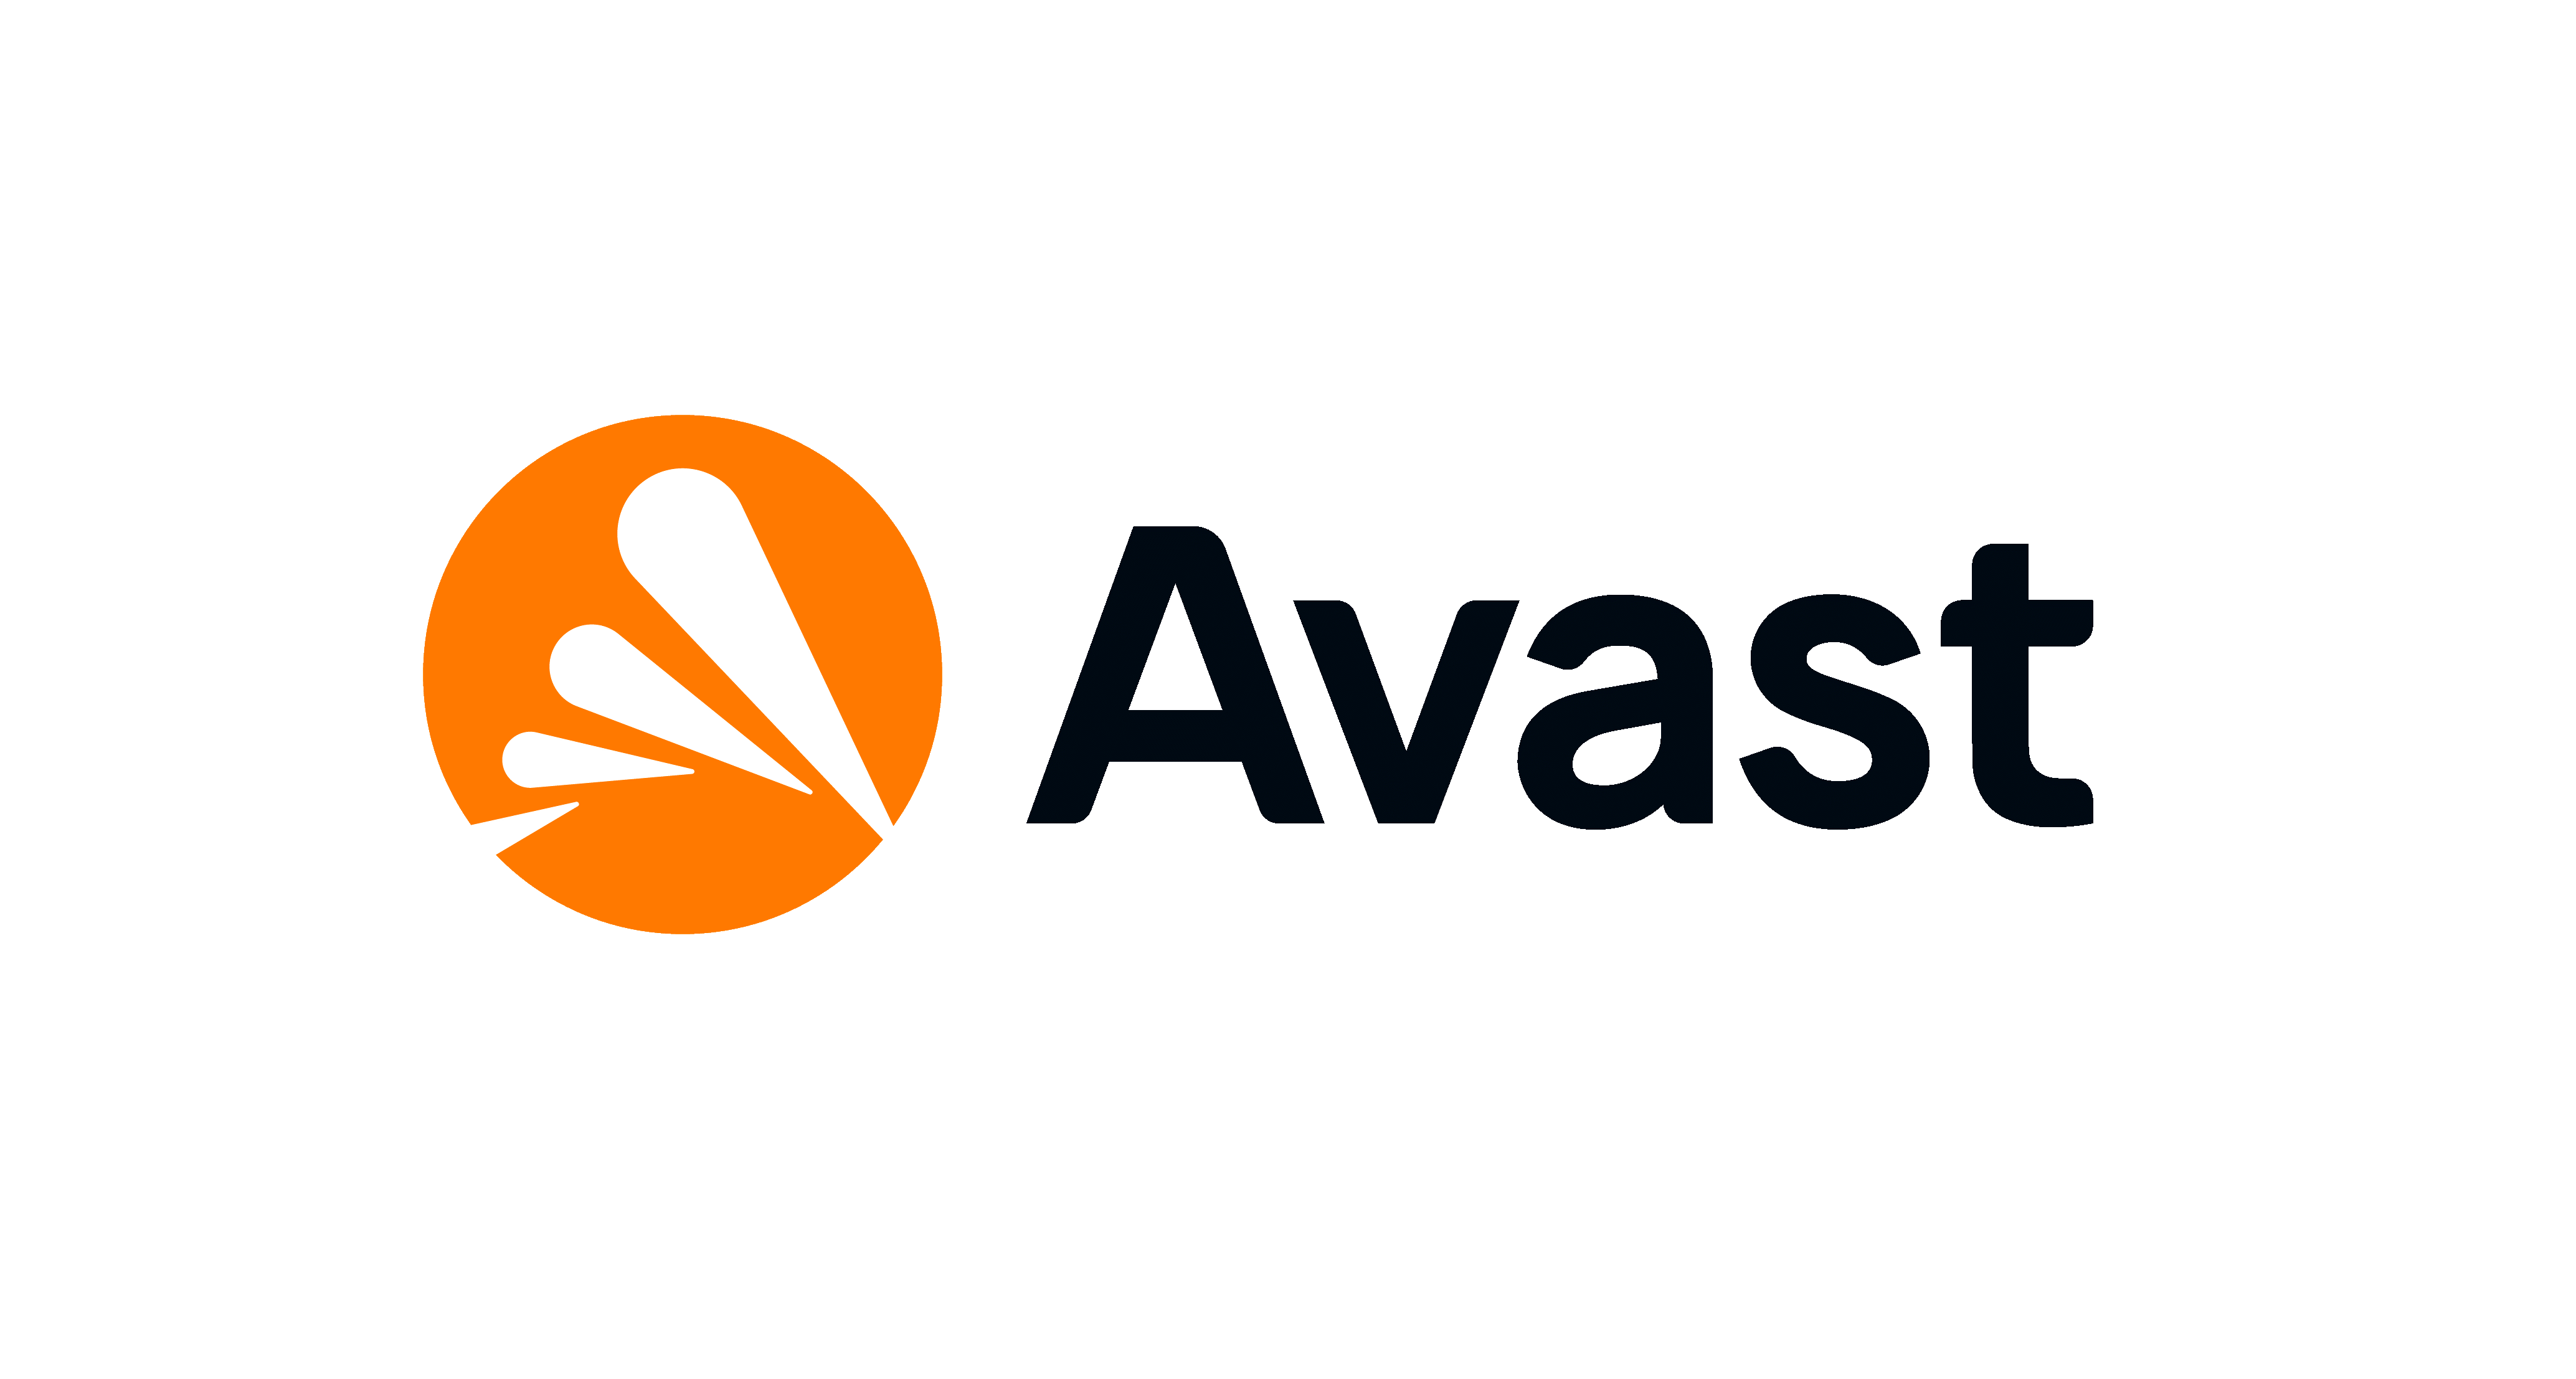 Avast Steps Up to Protect Digital Freedom for All